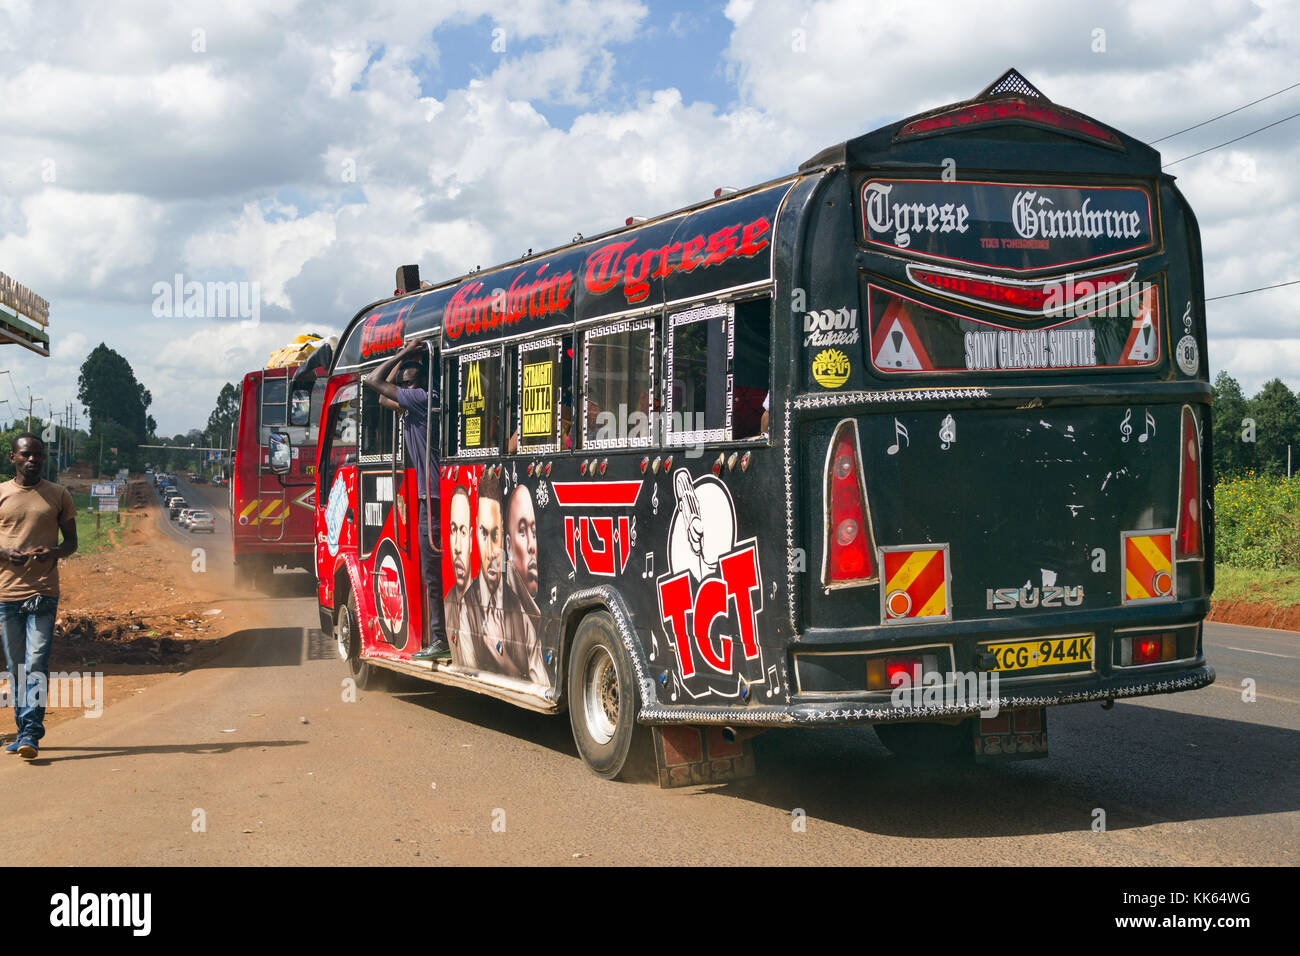 A brightly decorated large bus pulls in to a bus stop with conductor standing in doorway, Kenya, East Africa Stock Photo